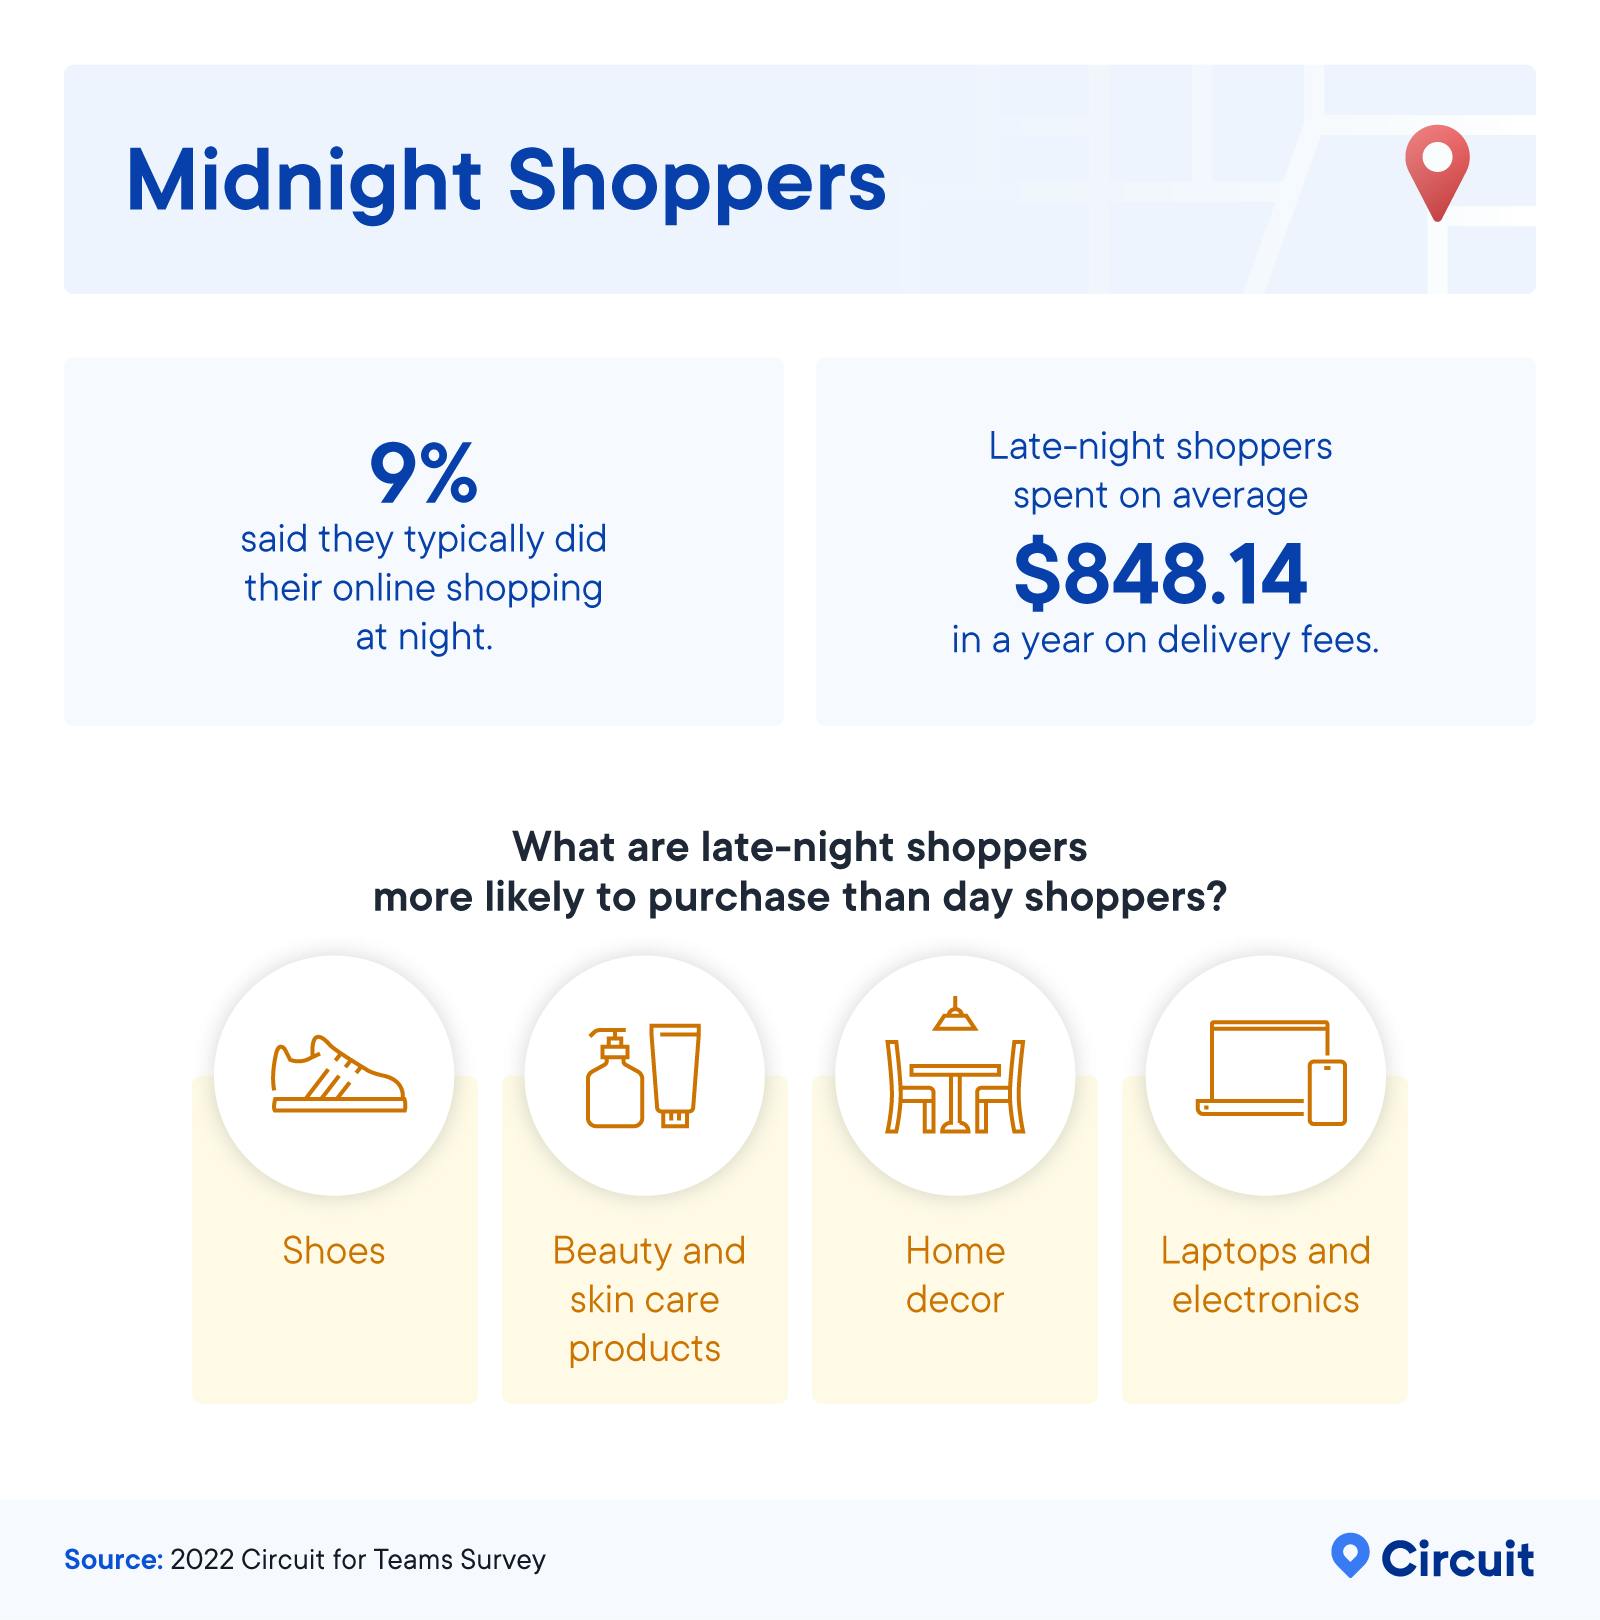 Midnight shoppers